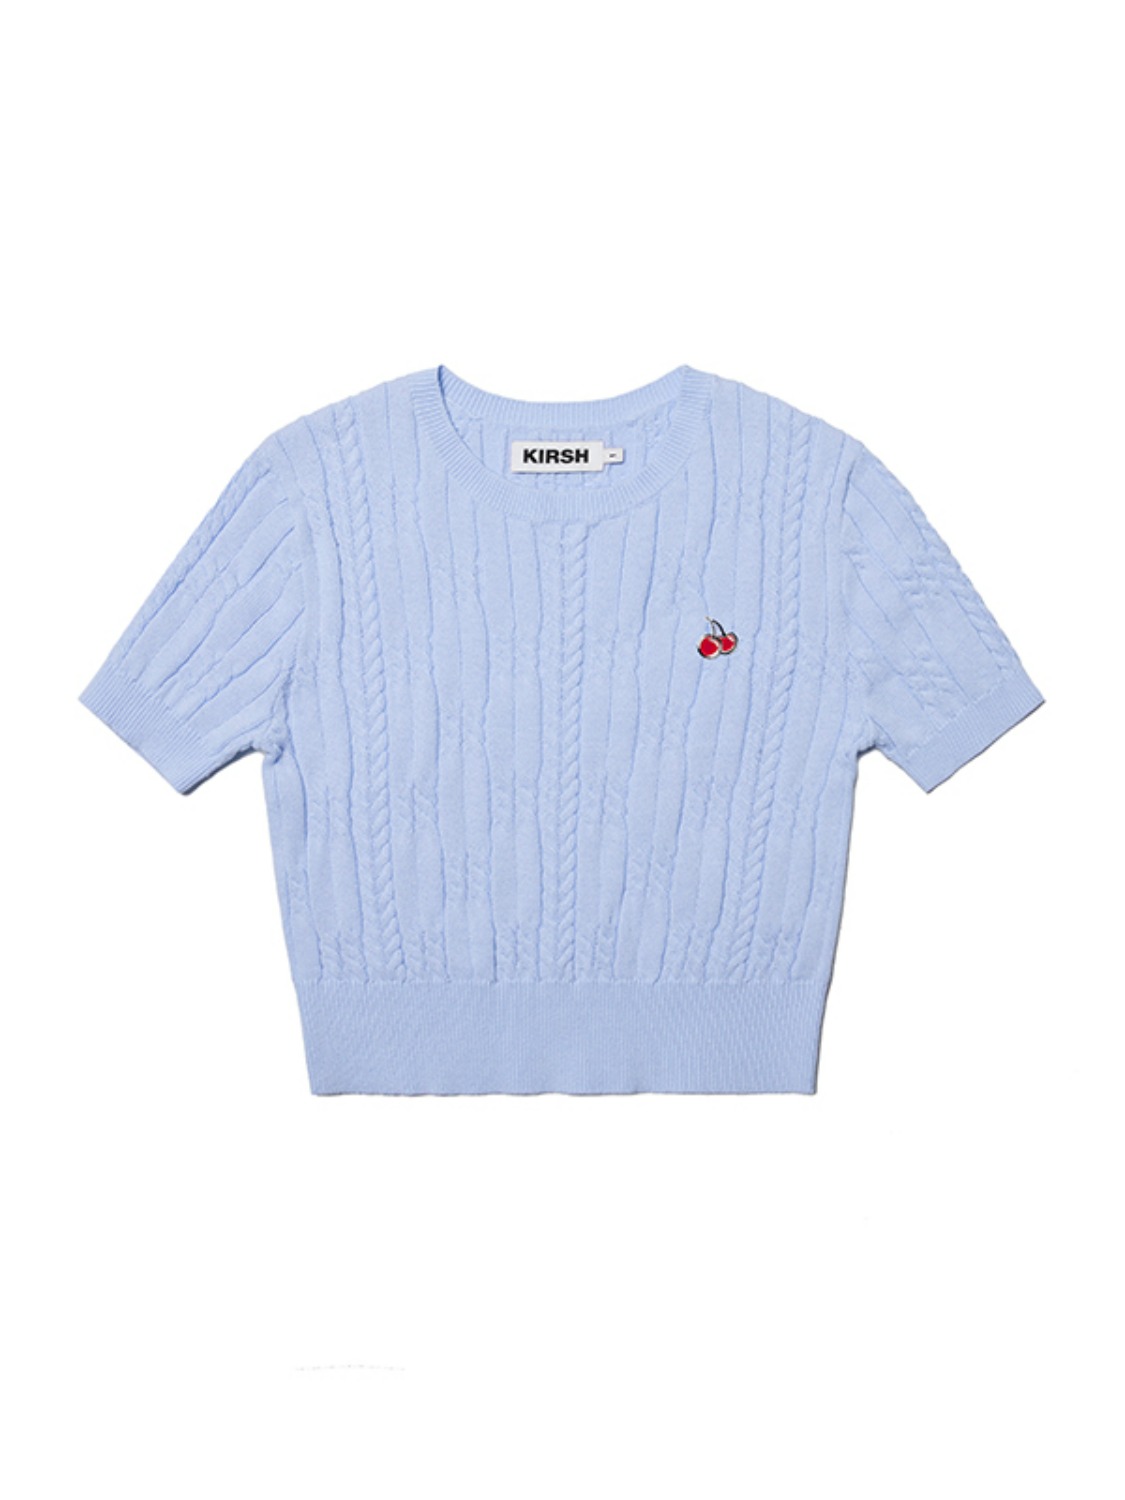 SMALL CHERRY CABLE CROP SHORT SLEEVE KNIT [SKY](7월 13일 예약배송)